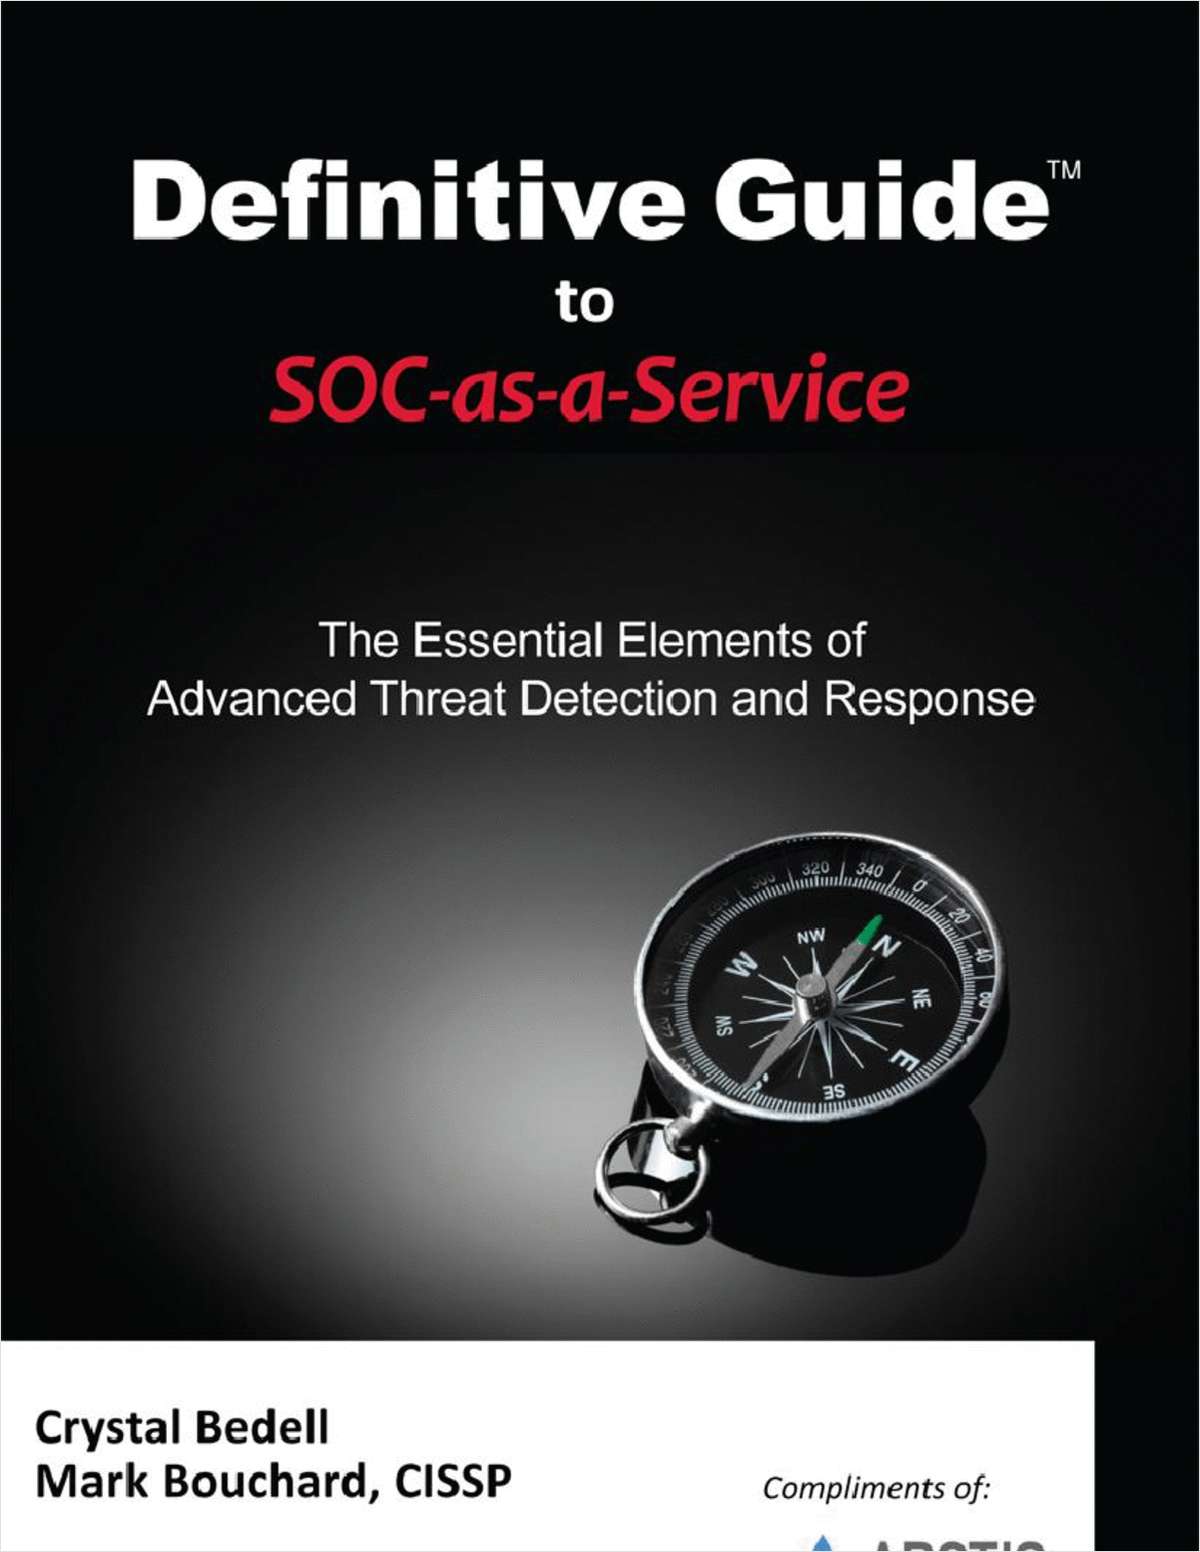 Definitive Guide to SOC-as-a-Service - The Essential Elements of Advanced Threat Detection and Response